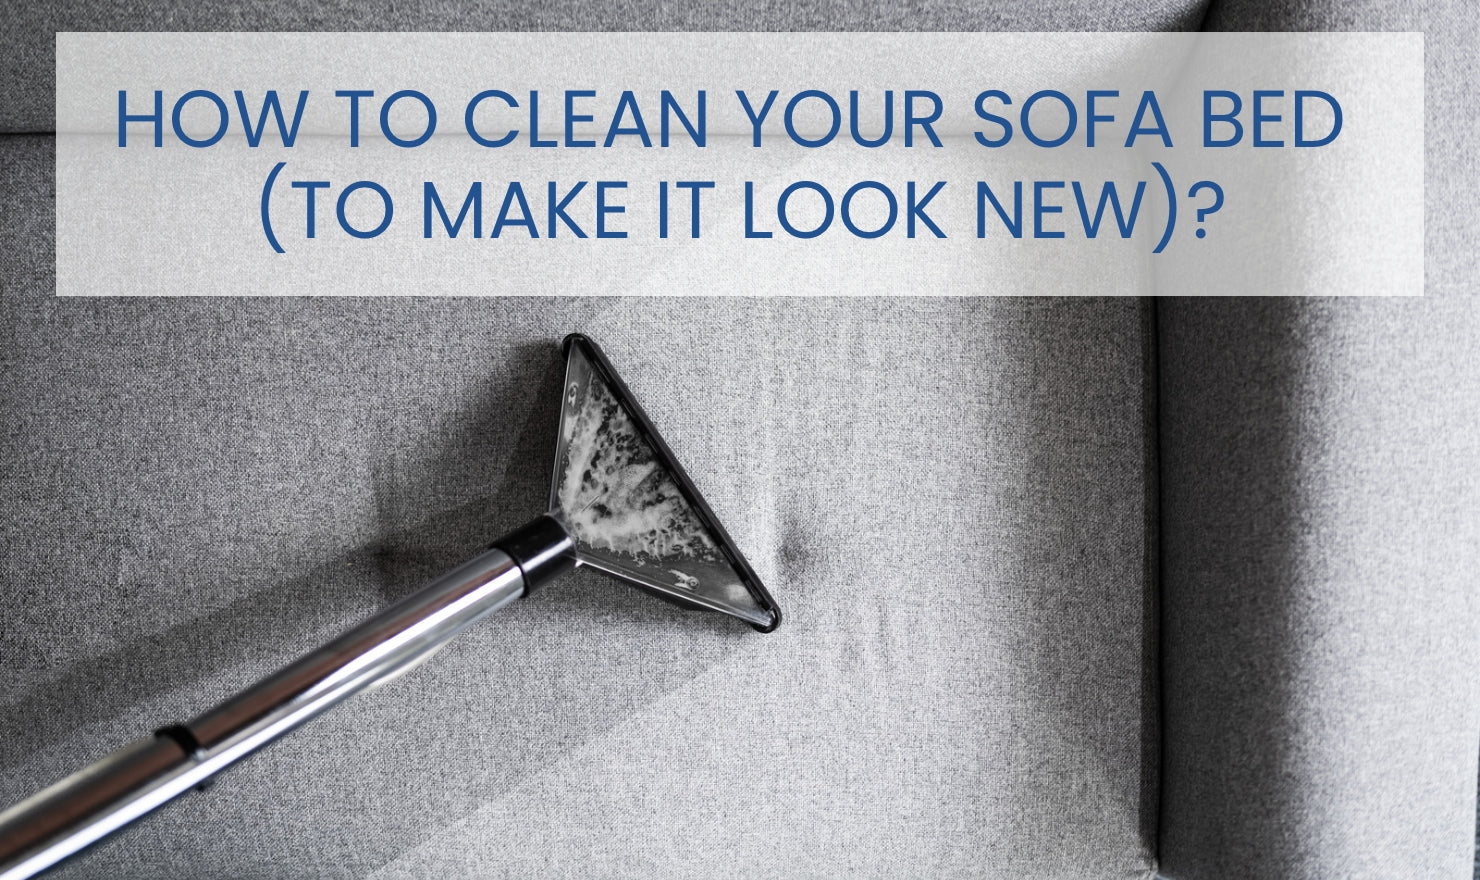 How To Clean Your Sofa Bed